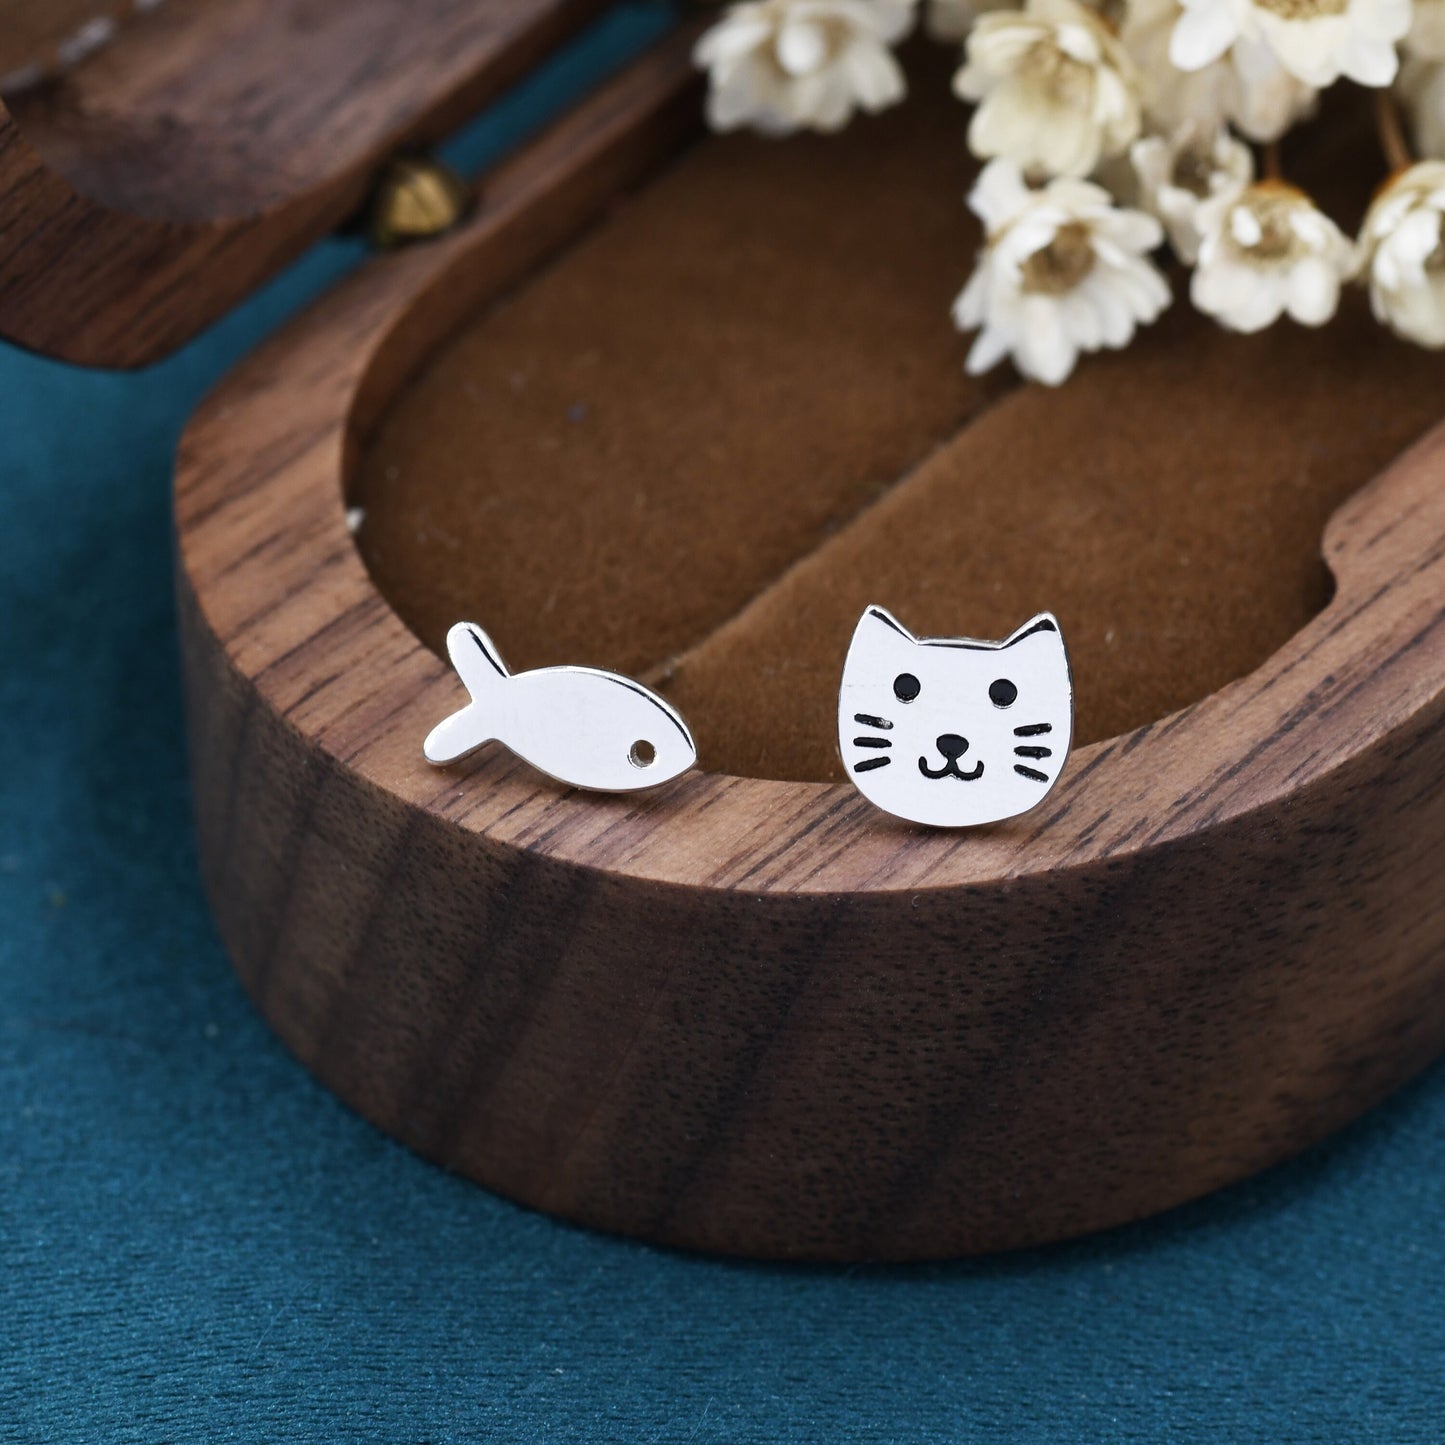 Mismatched Cat and Fish Stud Earrings in Sterling Silver, Asymmetric Cat and Fish Earrings, Cute Cat Lover Earrings